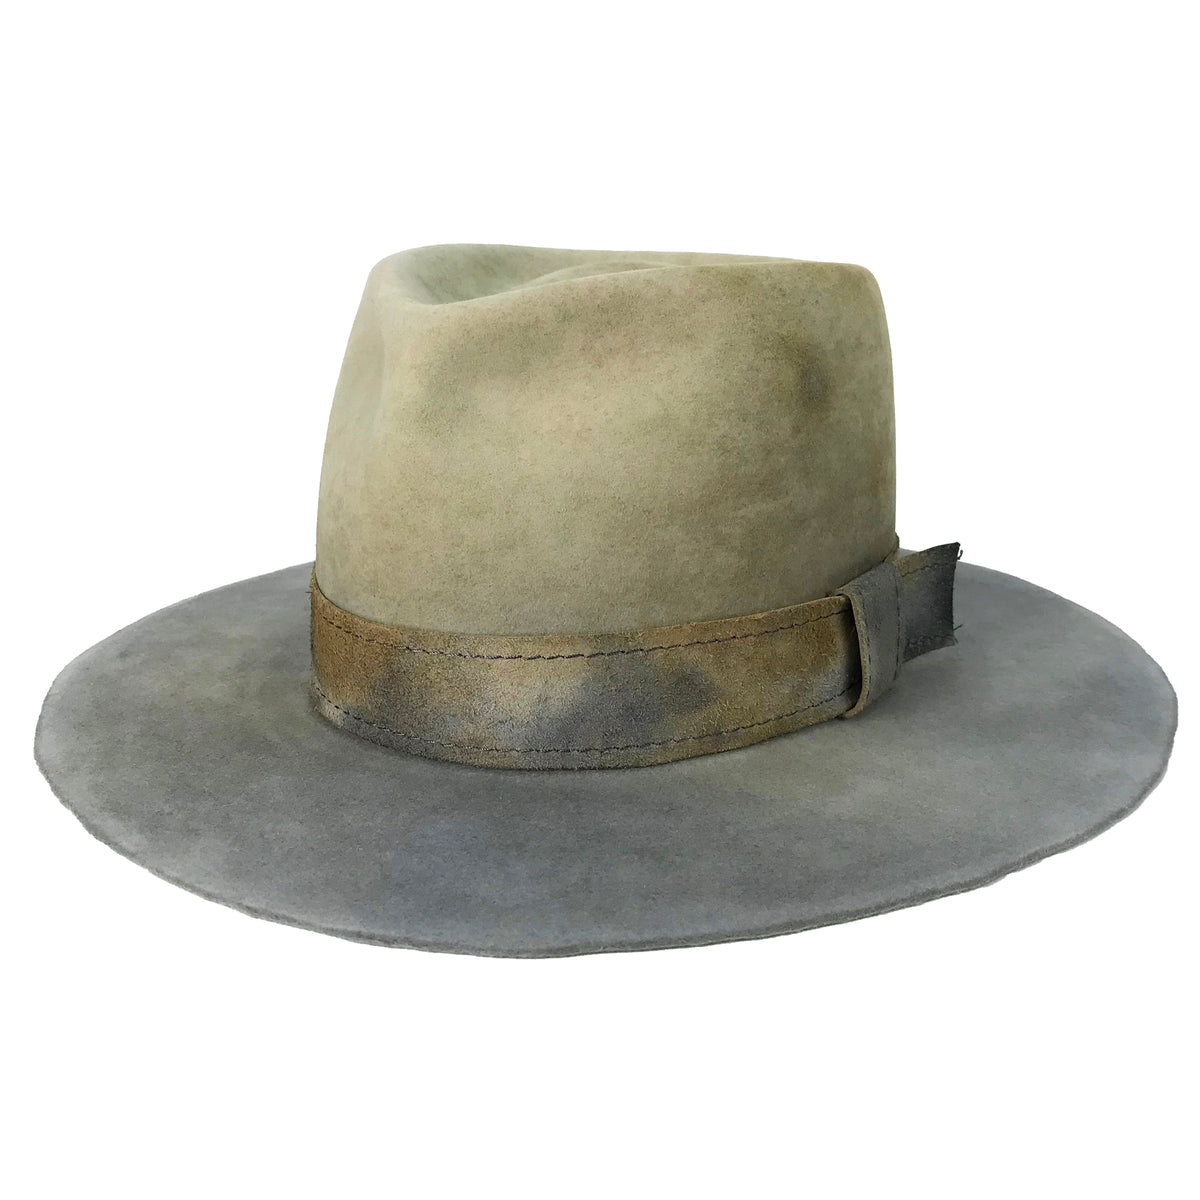 "on a happier note, here's a hat"  7 - 7 1/8